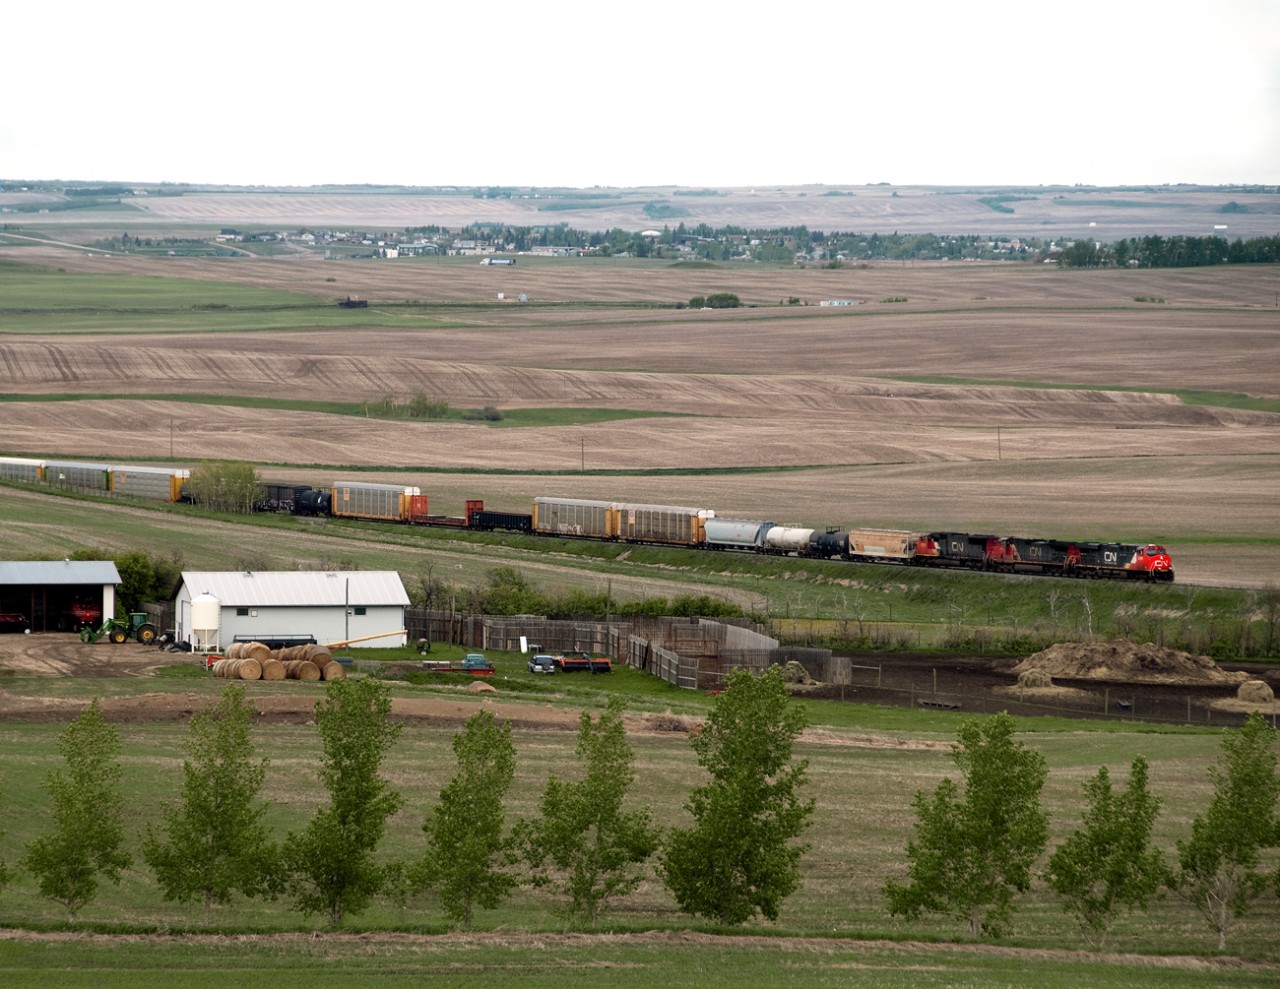 Toronto to Calgary train 115,now operating via the Edmonton to Calgary line account CN's abandonment of the Oyen and Drumheller Subs, in the rolling hills between Trochu and Three Hills Alberta.